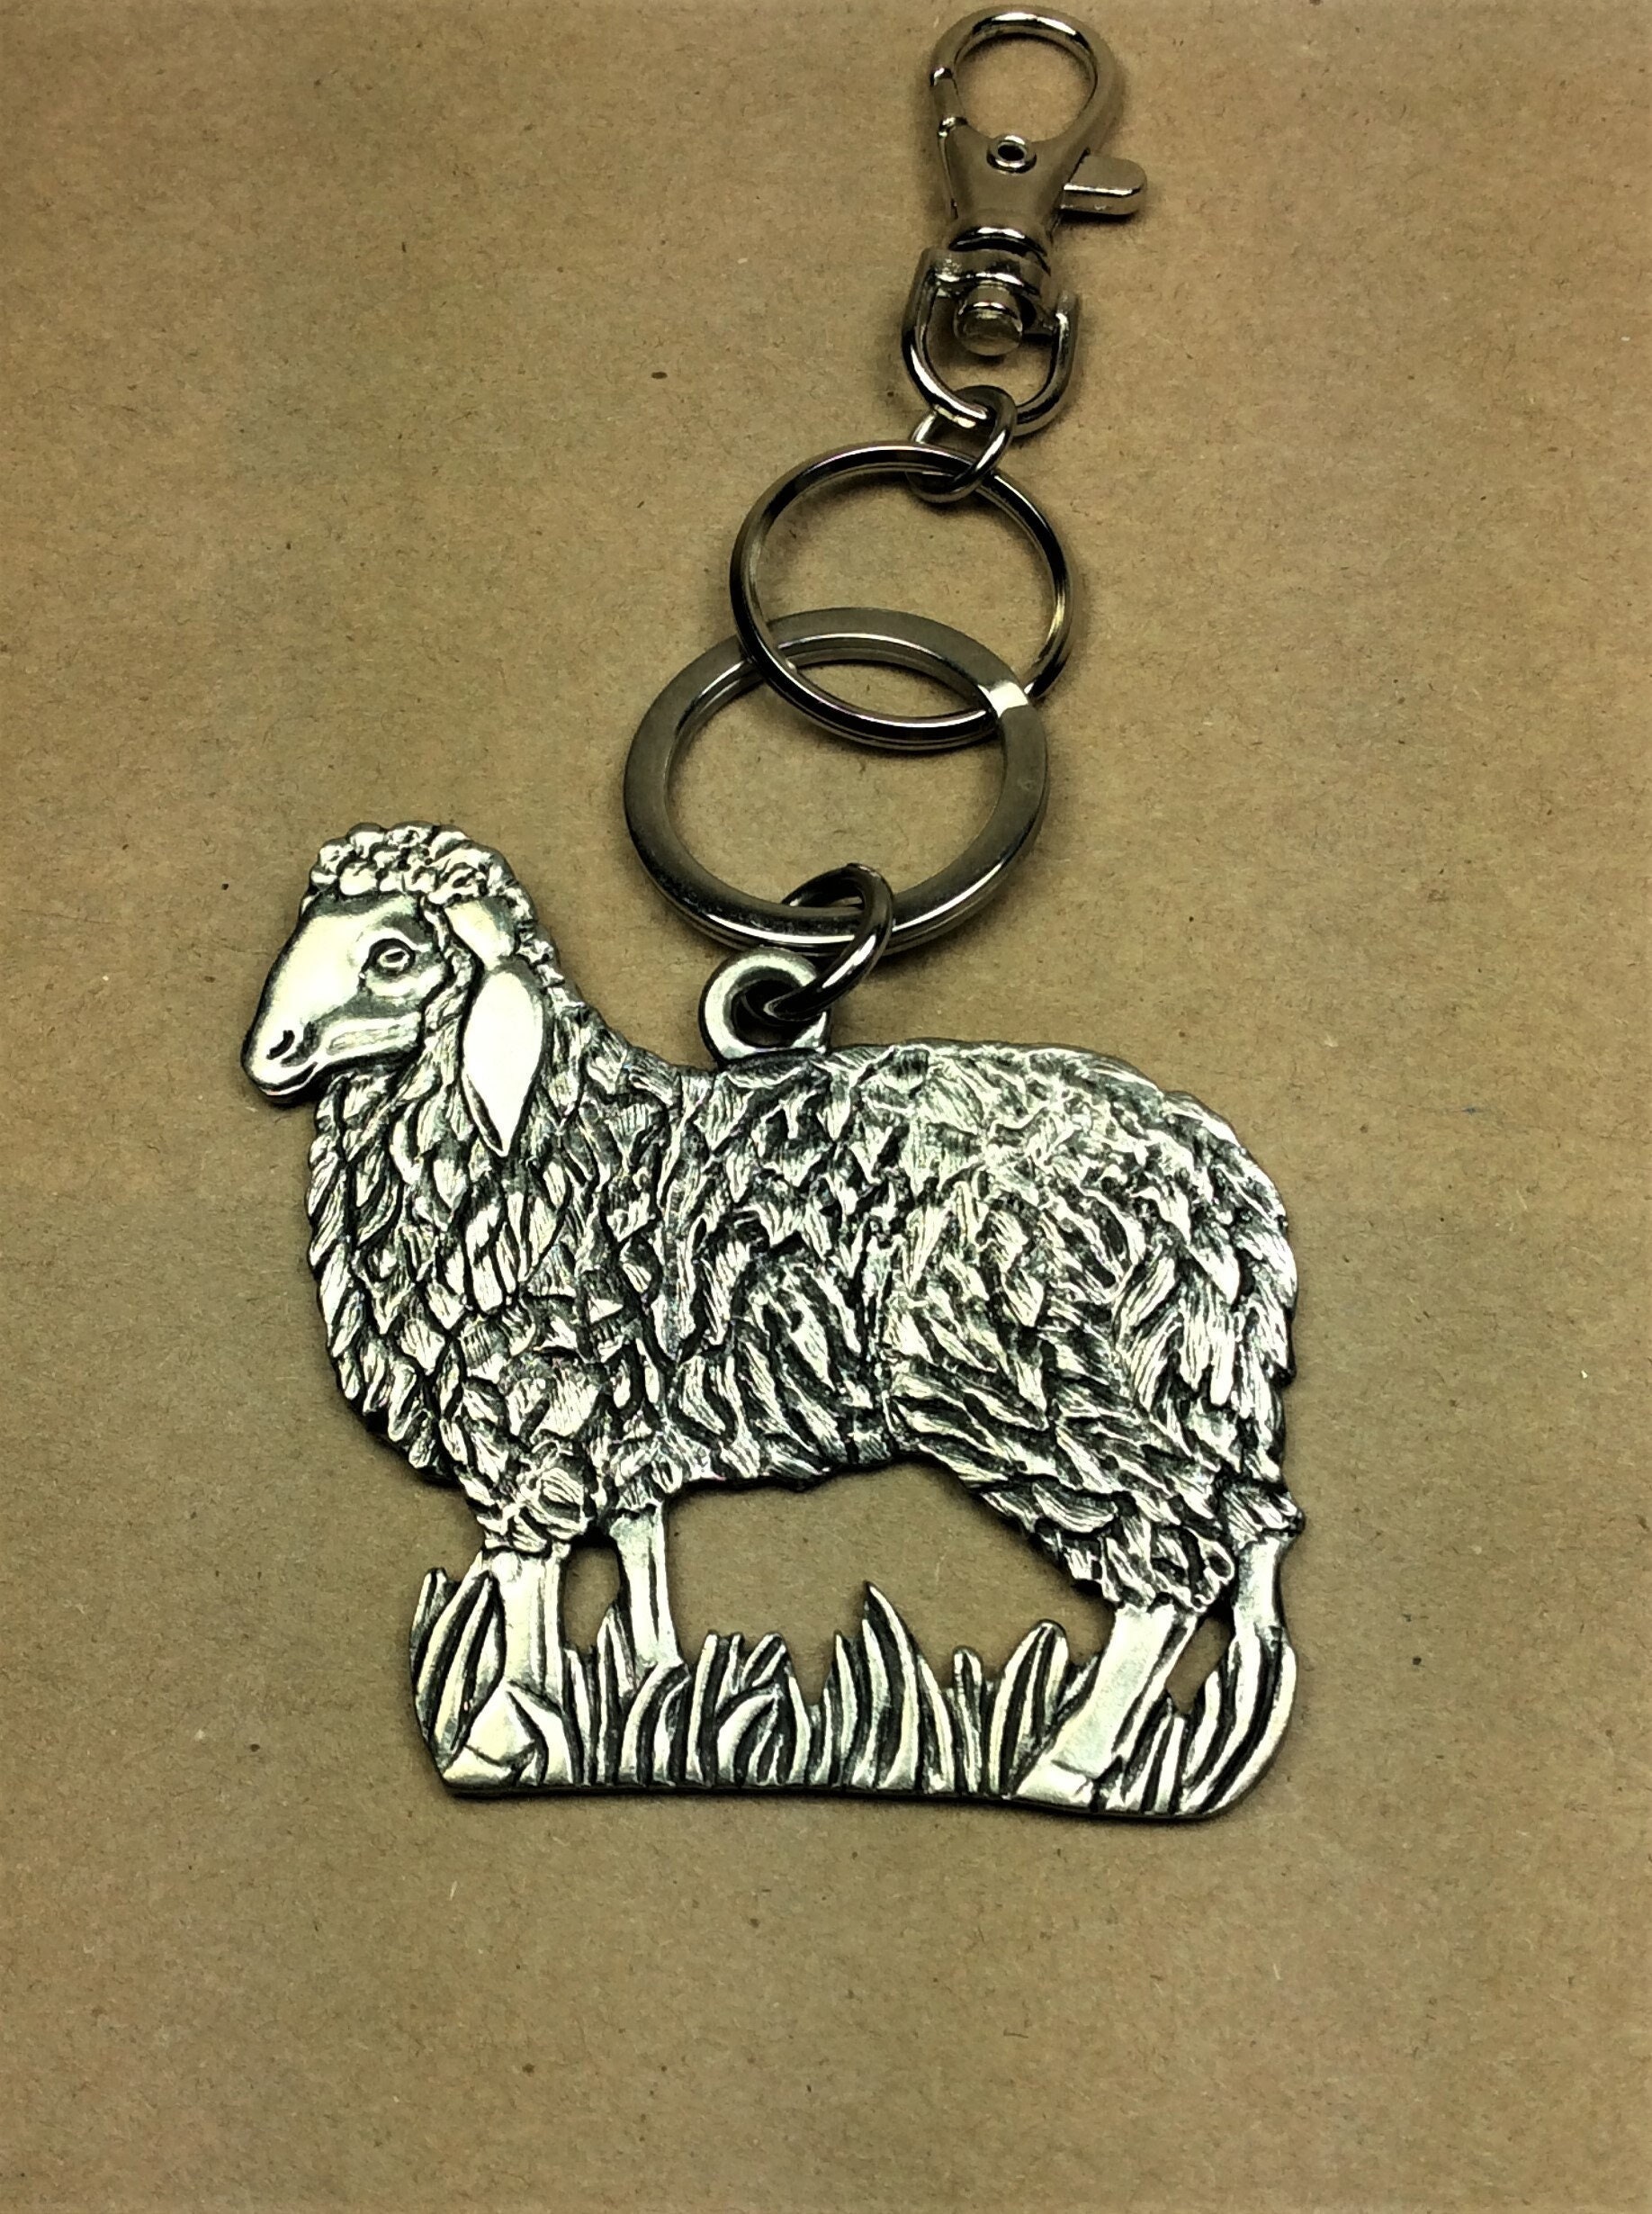 Large Silver Tone Double Sided Ram/Sheep Purse Charm Keyring Detailed Design & Stamped Hm "1992""